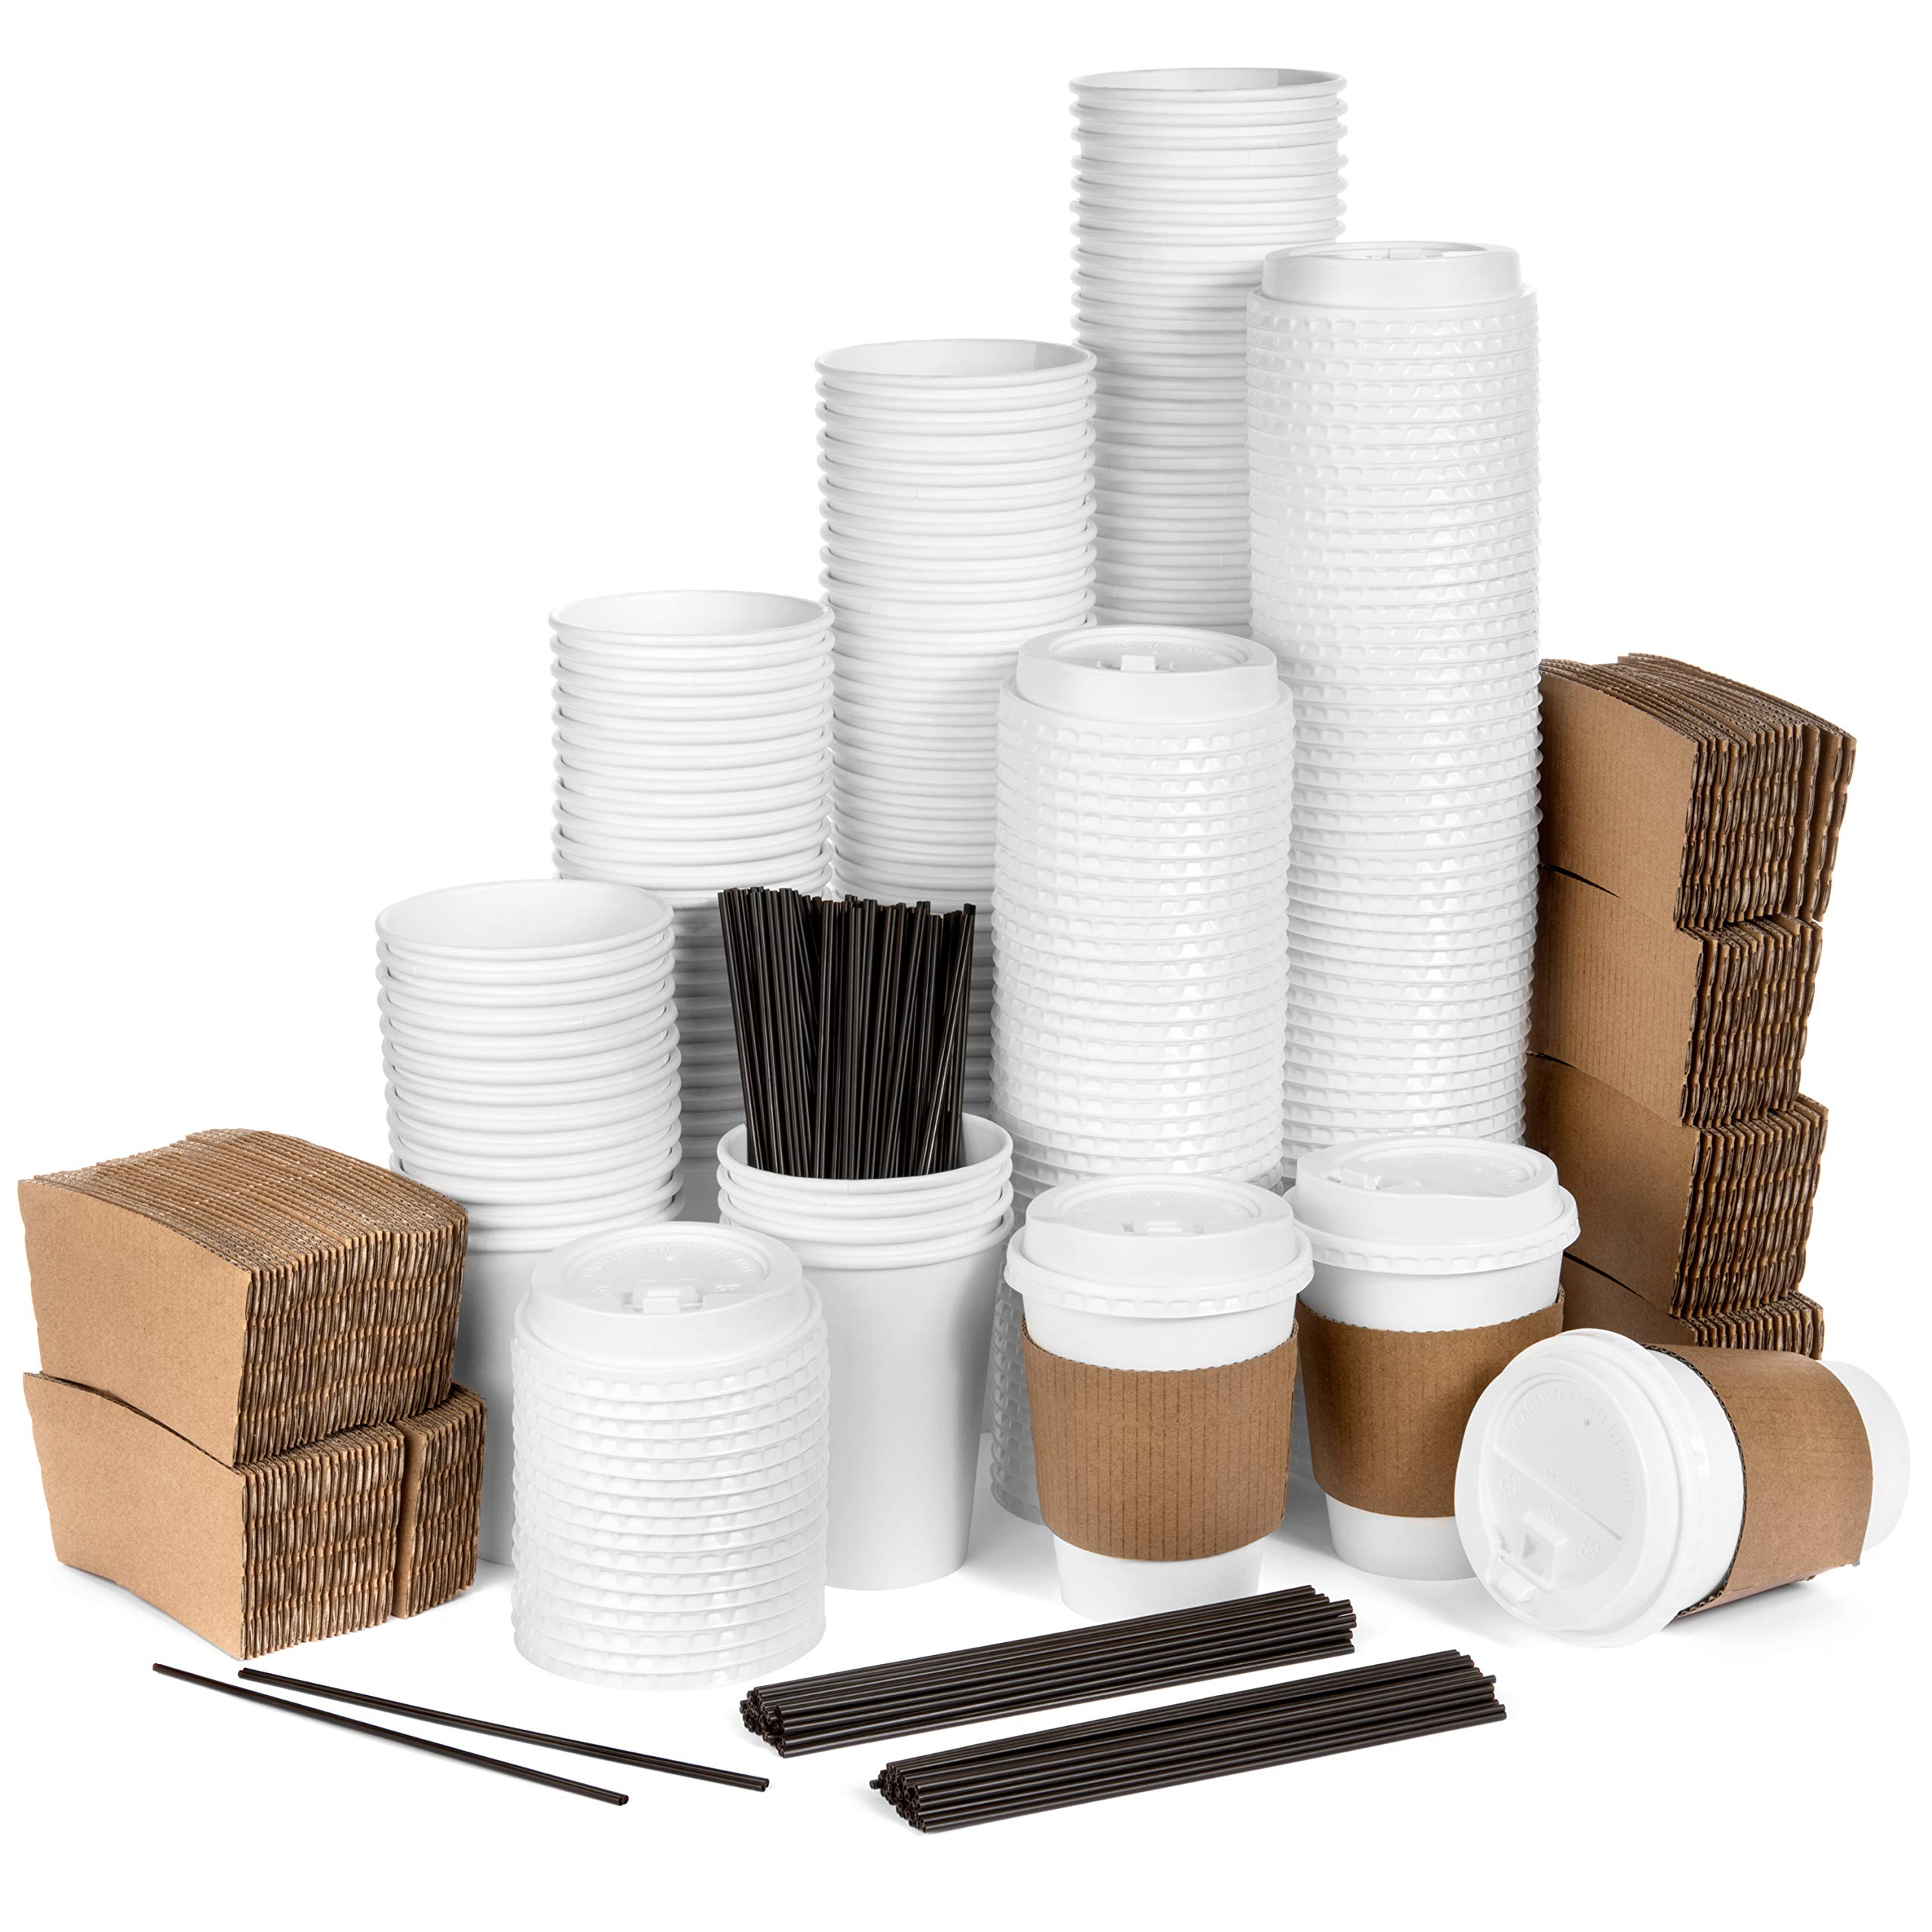 Book Cover Average Joe Disposable Coffee Cups with Lids - 120 Pack - 12 Oz Paper Coffee Cups, Lids, Sleeves and Stirrers - White To Go Cups, White Lids, Blank Coffee Sleeves to Personalize - Keeps Coffee Hot